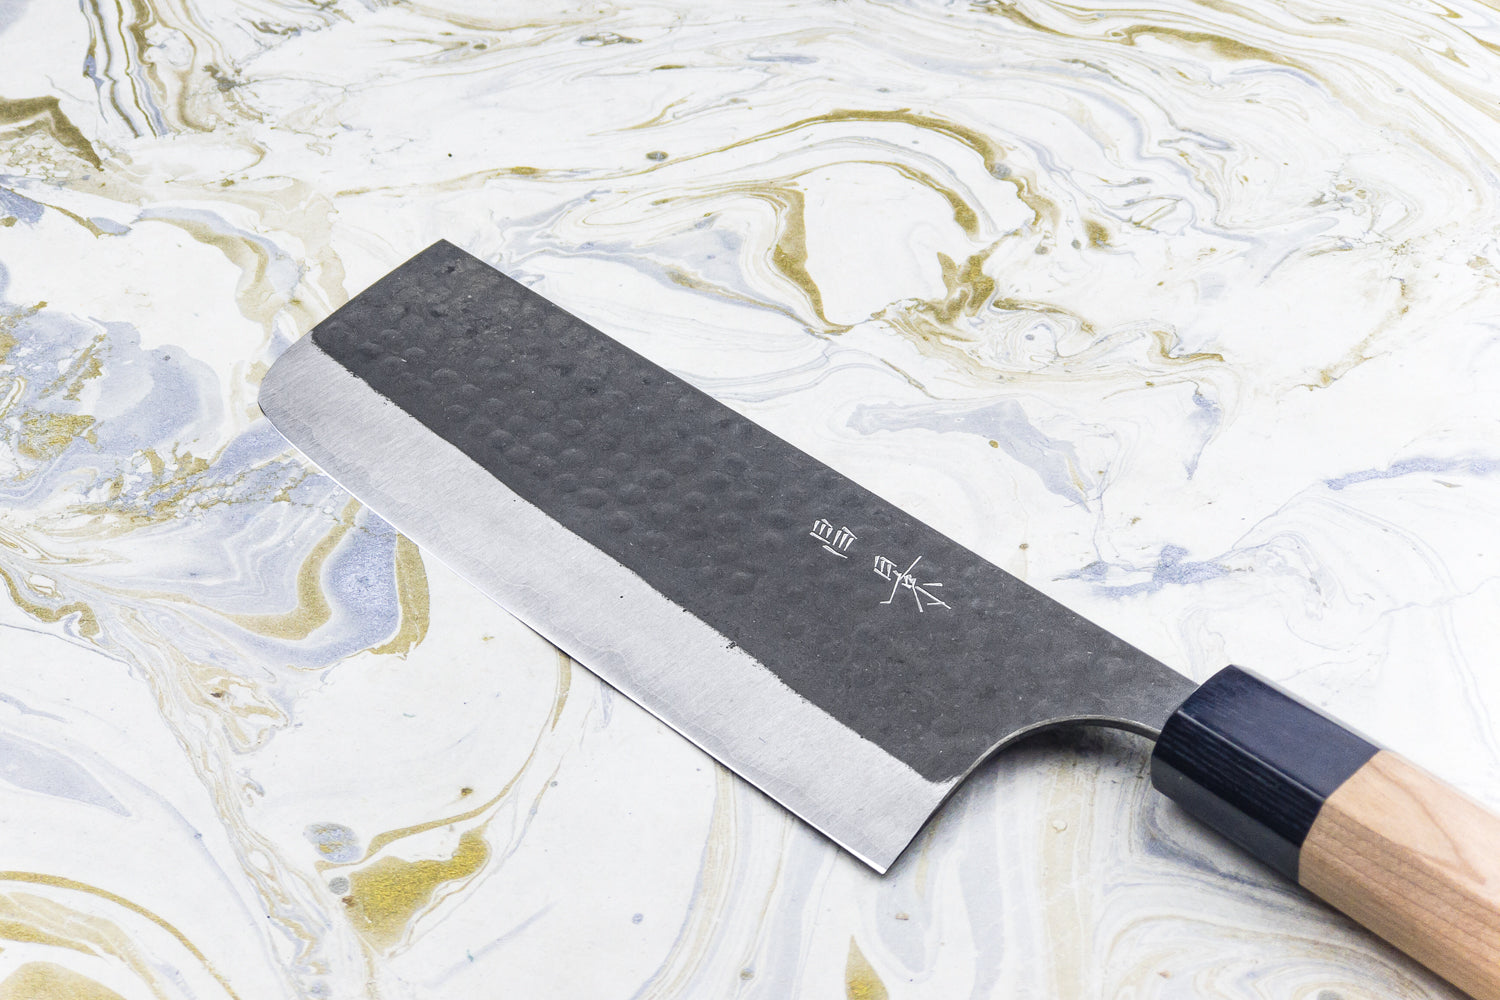 Koi Knives' Big Red Knives are Inspired by the Australian Wildlife